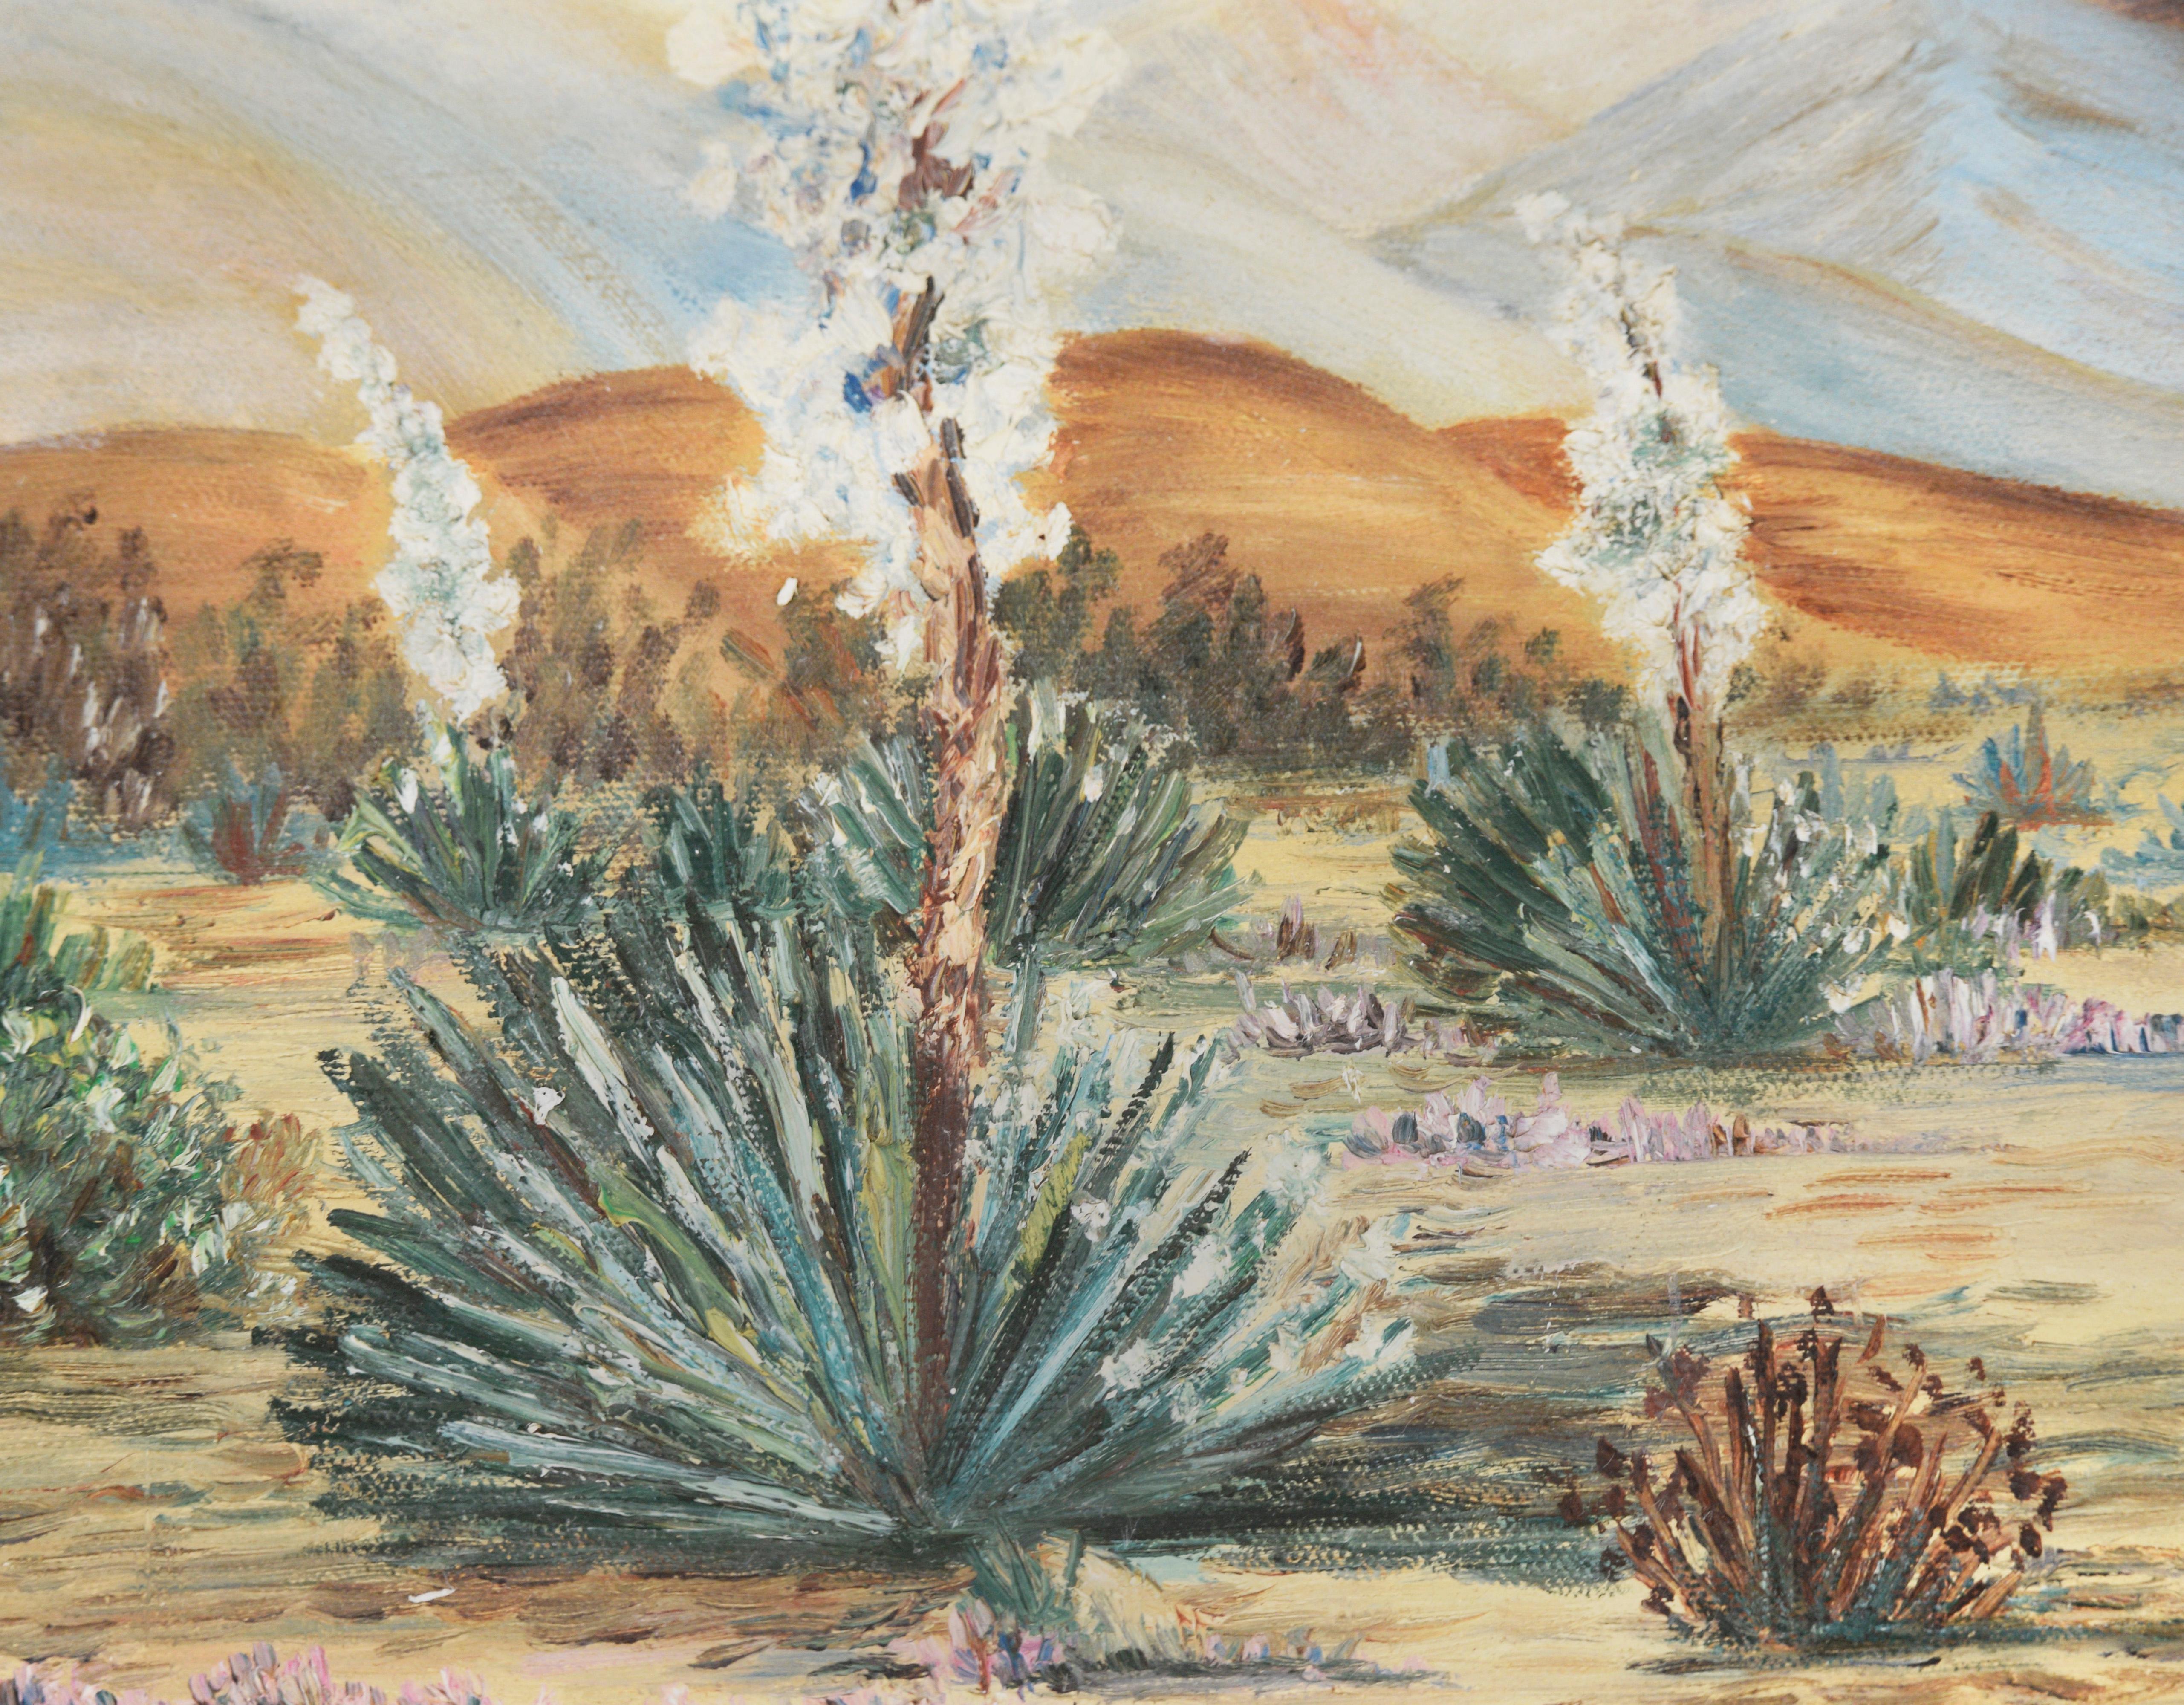 Desert Landscape with Agave and Yucca - Oil on Canvas

Oil painting of a desert landscape by an unknown California artist (American, 20th C). California high desert with vibrant green Yucca and agave plants. There are snow covered mountains in the